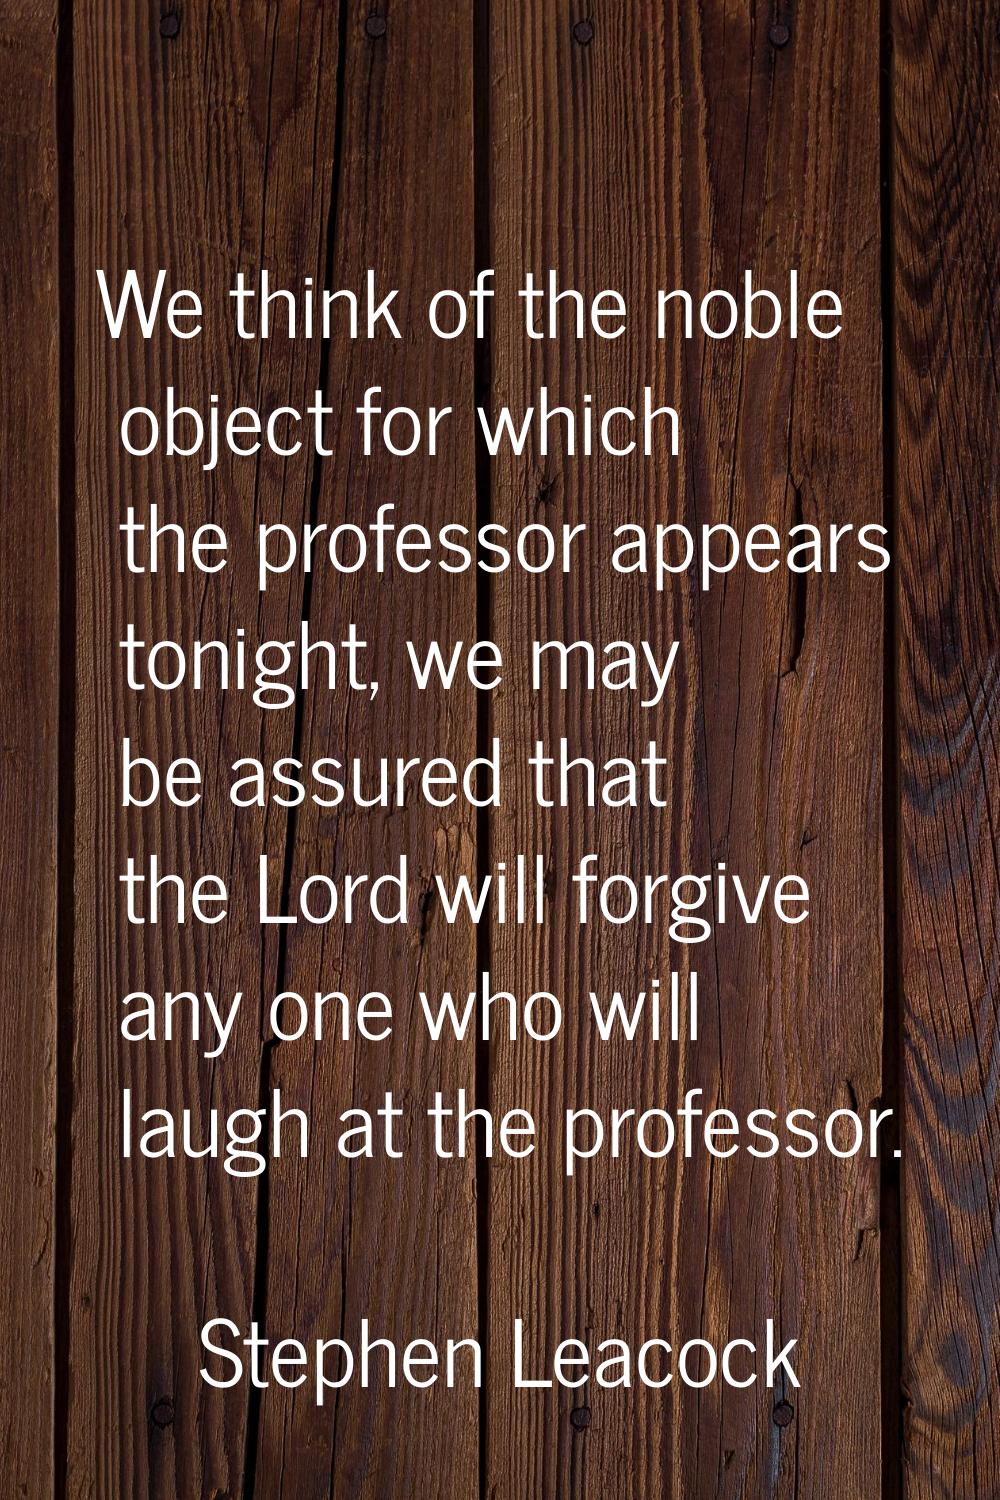 We think of the noble object for which the professor appears tonight, we may be assured that the Lo